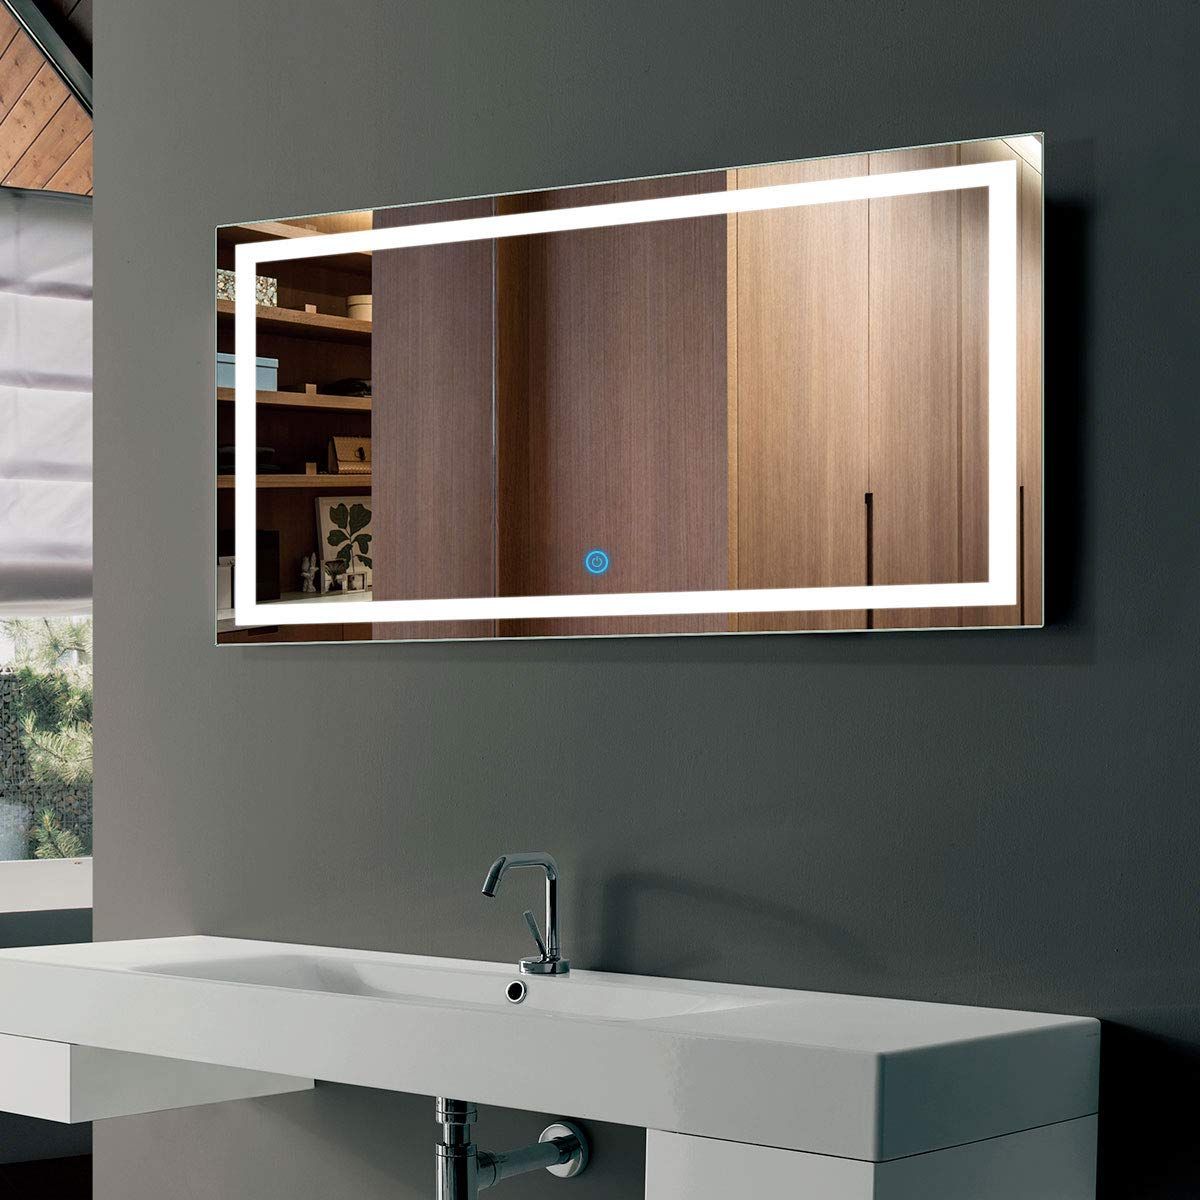 Dp Home Led Lighted Rectangle Bathroom Mirror, Modern Wall Mirror With  Lights, Wall Mounted Makeup Vanity Mirror Over Cosmetic Bathroom Sink 40 X  24 Intended For Well Known Modern Wall Mirrors (View 15 of 20)